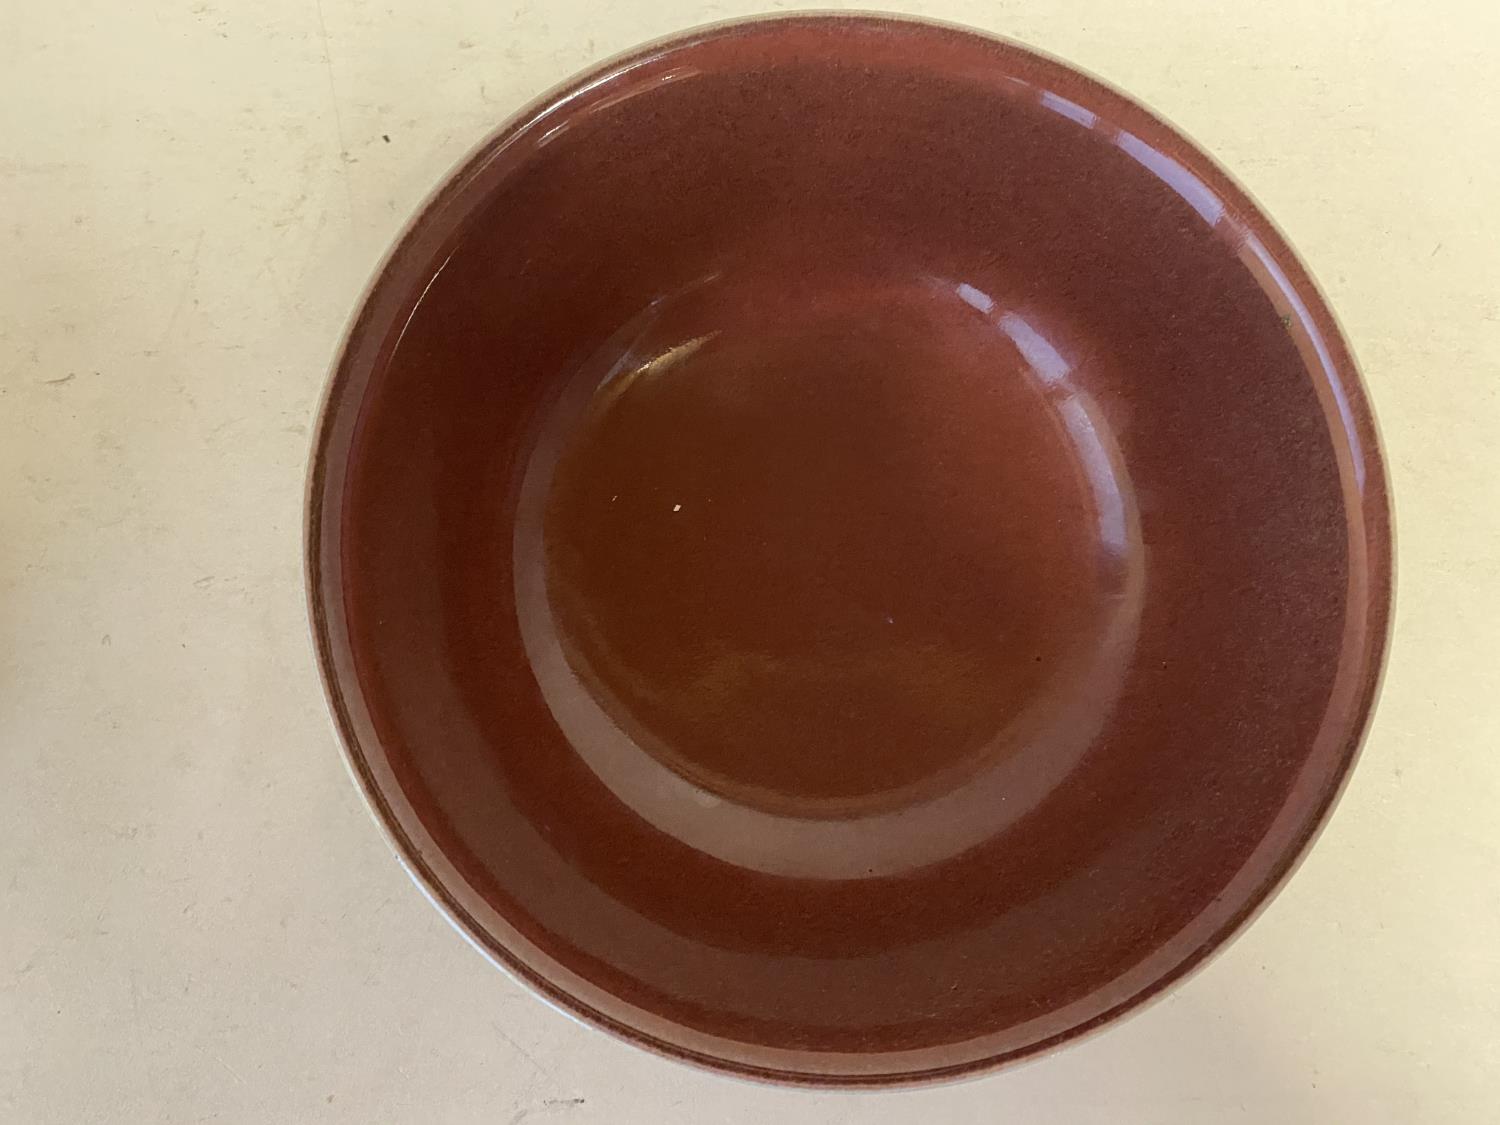 Chinese red bowl, with a crackle glaze to base, condition - crack and chips/minor frits to base - Image 4 of 5